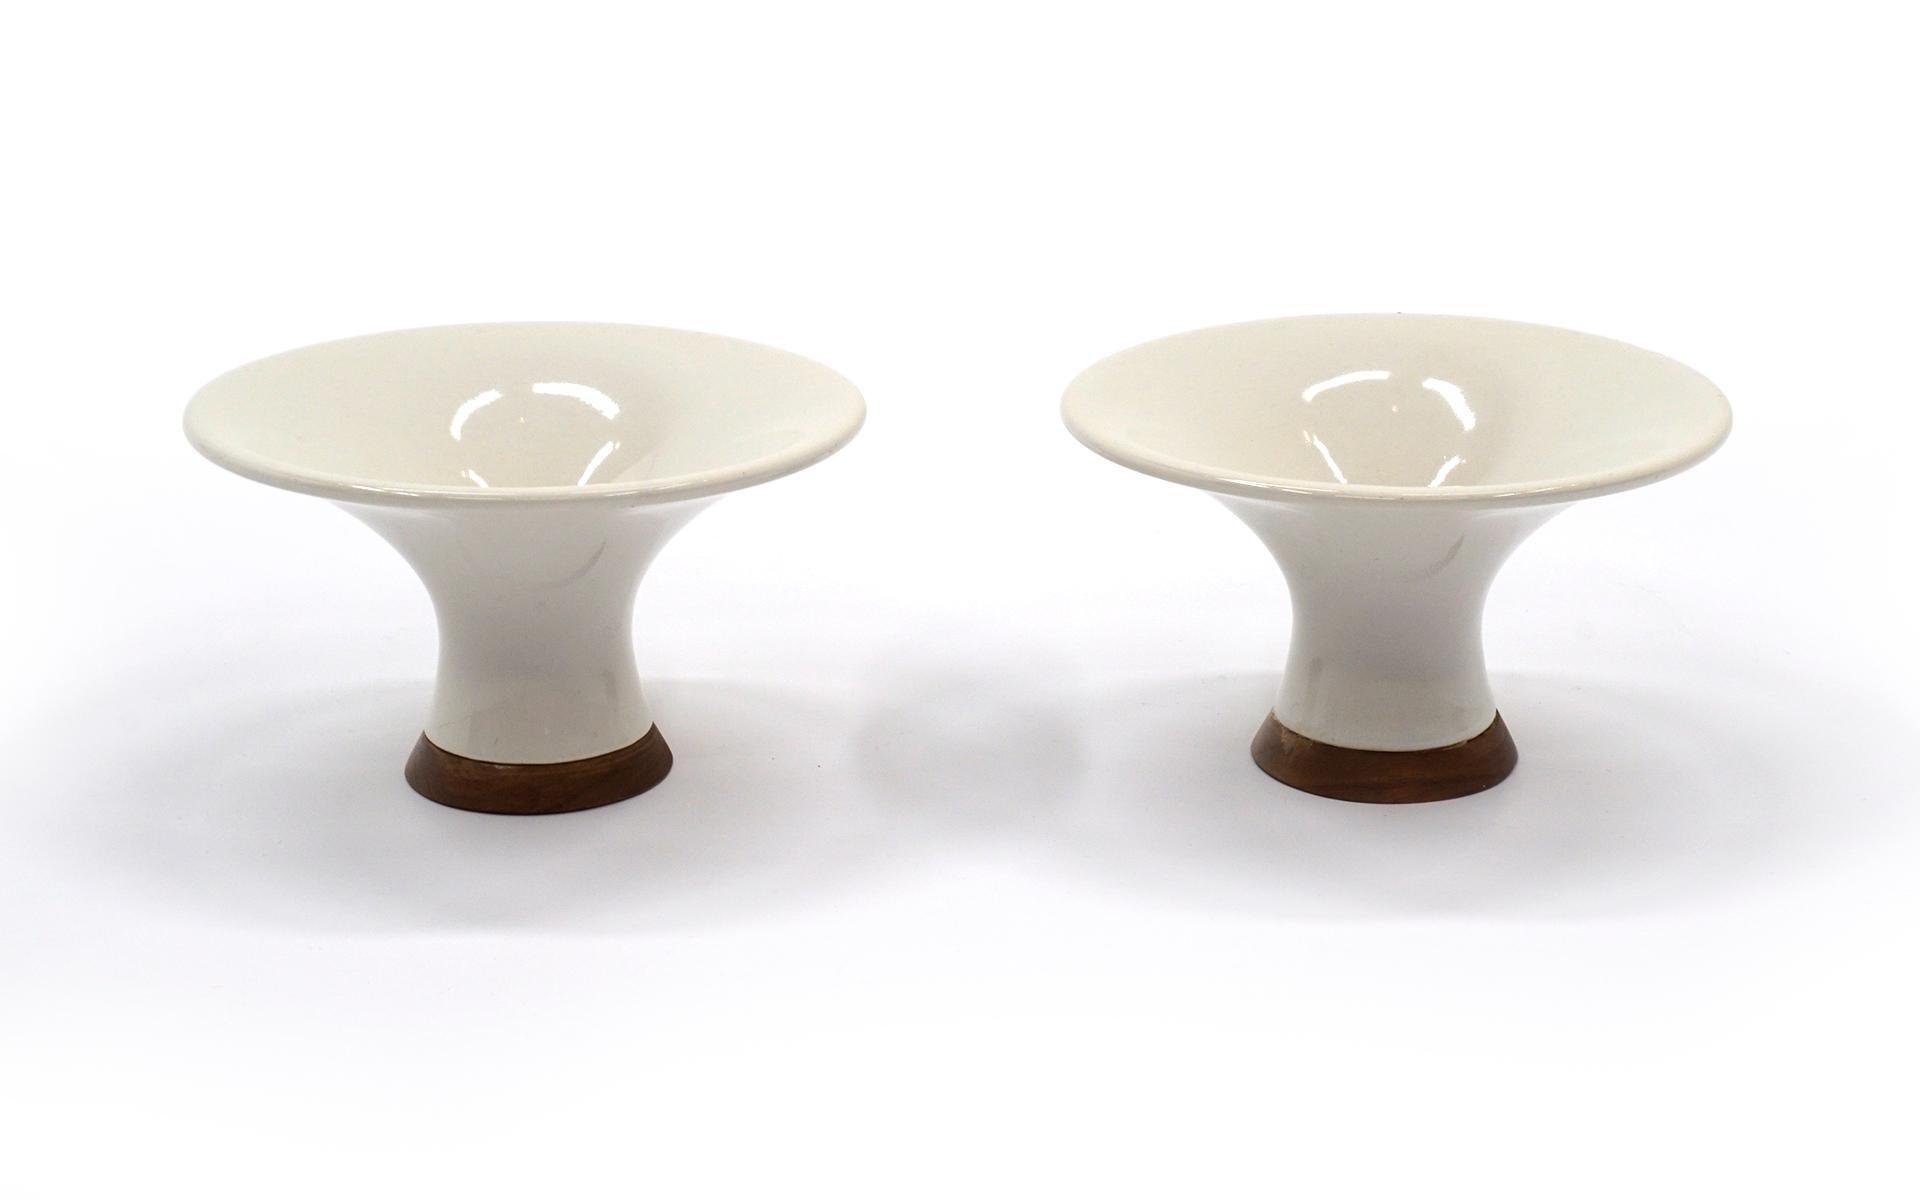 Pair of Danish candleholders / candlesticks. Fluted ivory ceramic with solid teak base. Beautifully understated pair. No chips, cracks, or repairs. Free and fast shipping to the Continental US via FedEx arriving to you within 3-6 days.